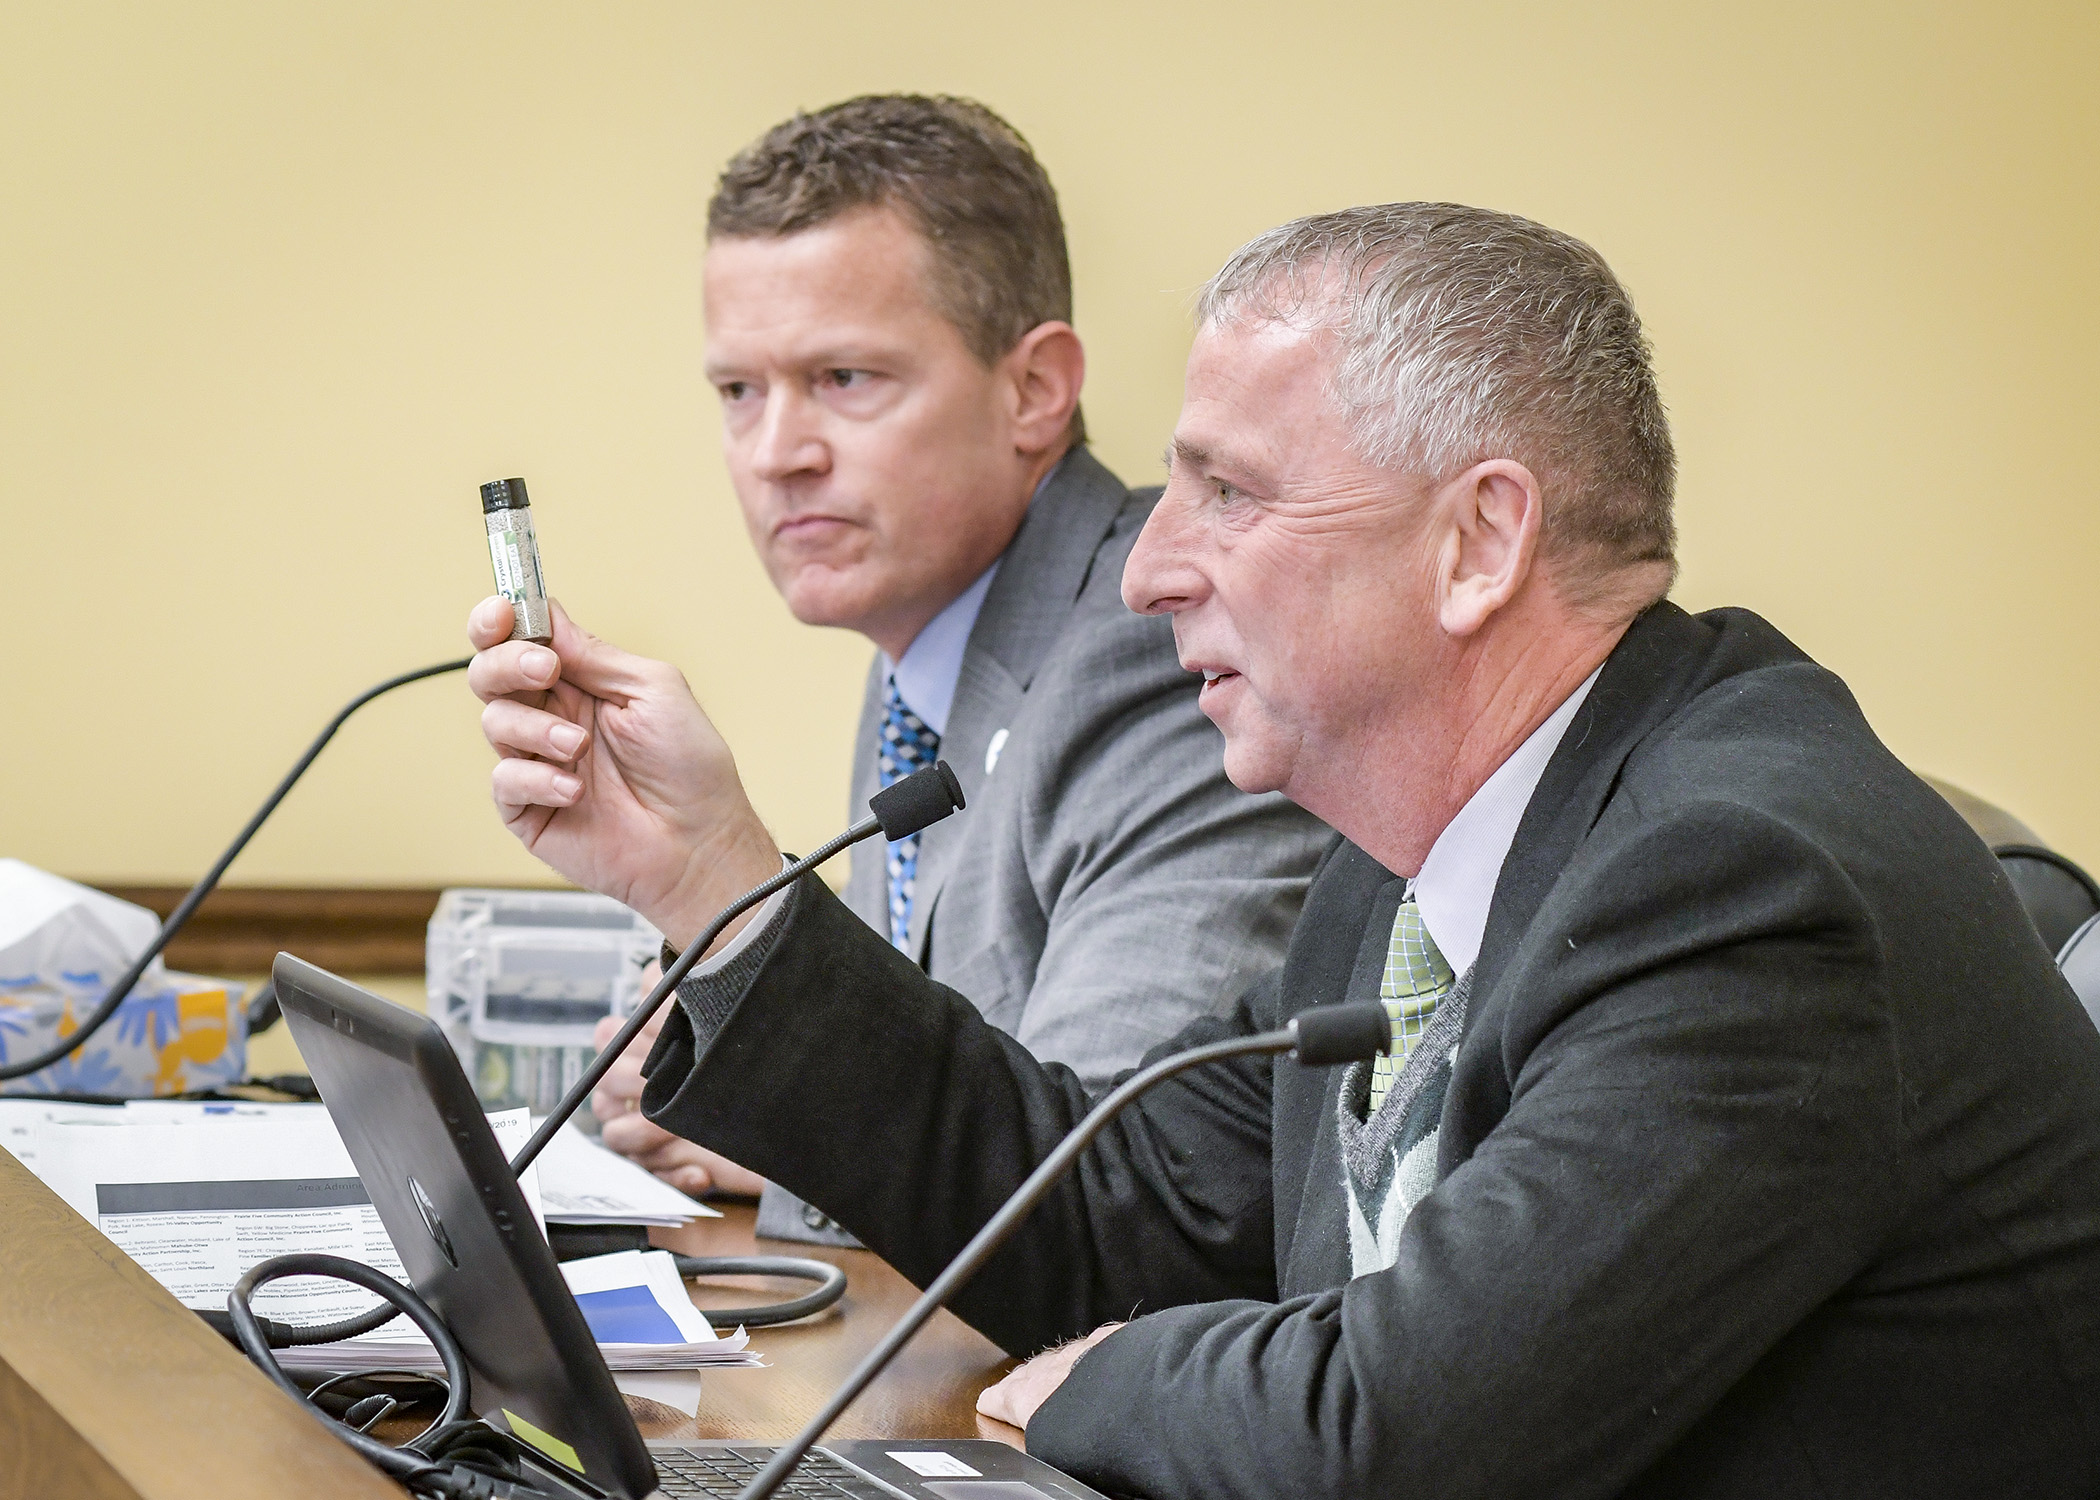 St. Cloud Mayor Dave Kleis and St. Cloud Public Services Director Patrick Shea show the House Energy and Climate Finance and Policy Division a sample of recovered phosphorus during a Jan. 31 hearing. Photo by Andrew VonBank